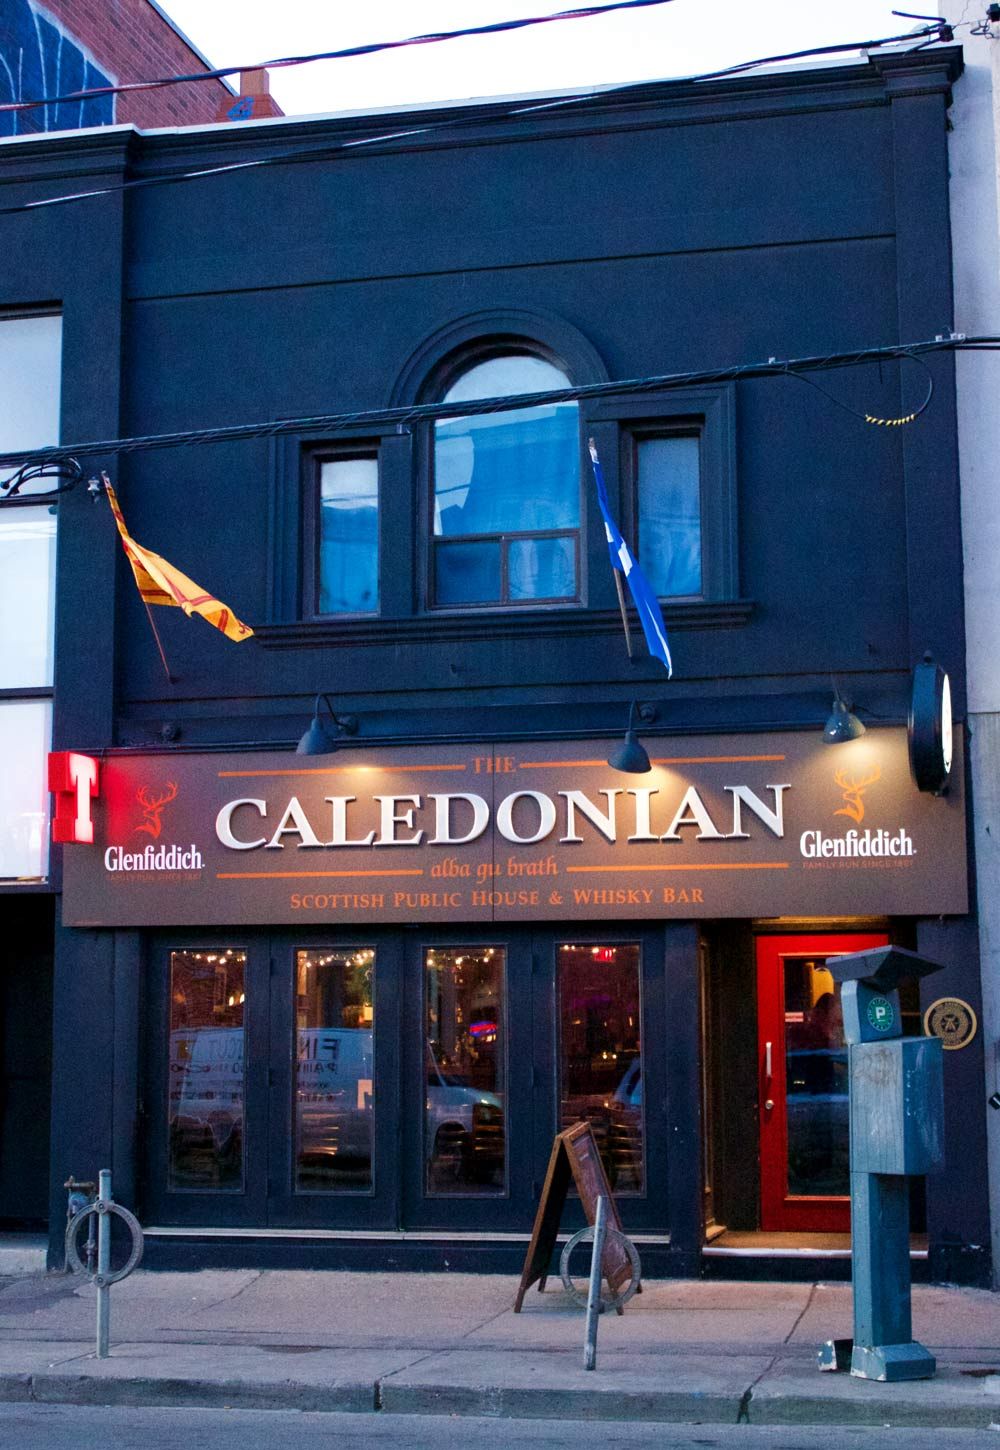 The Caledonian